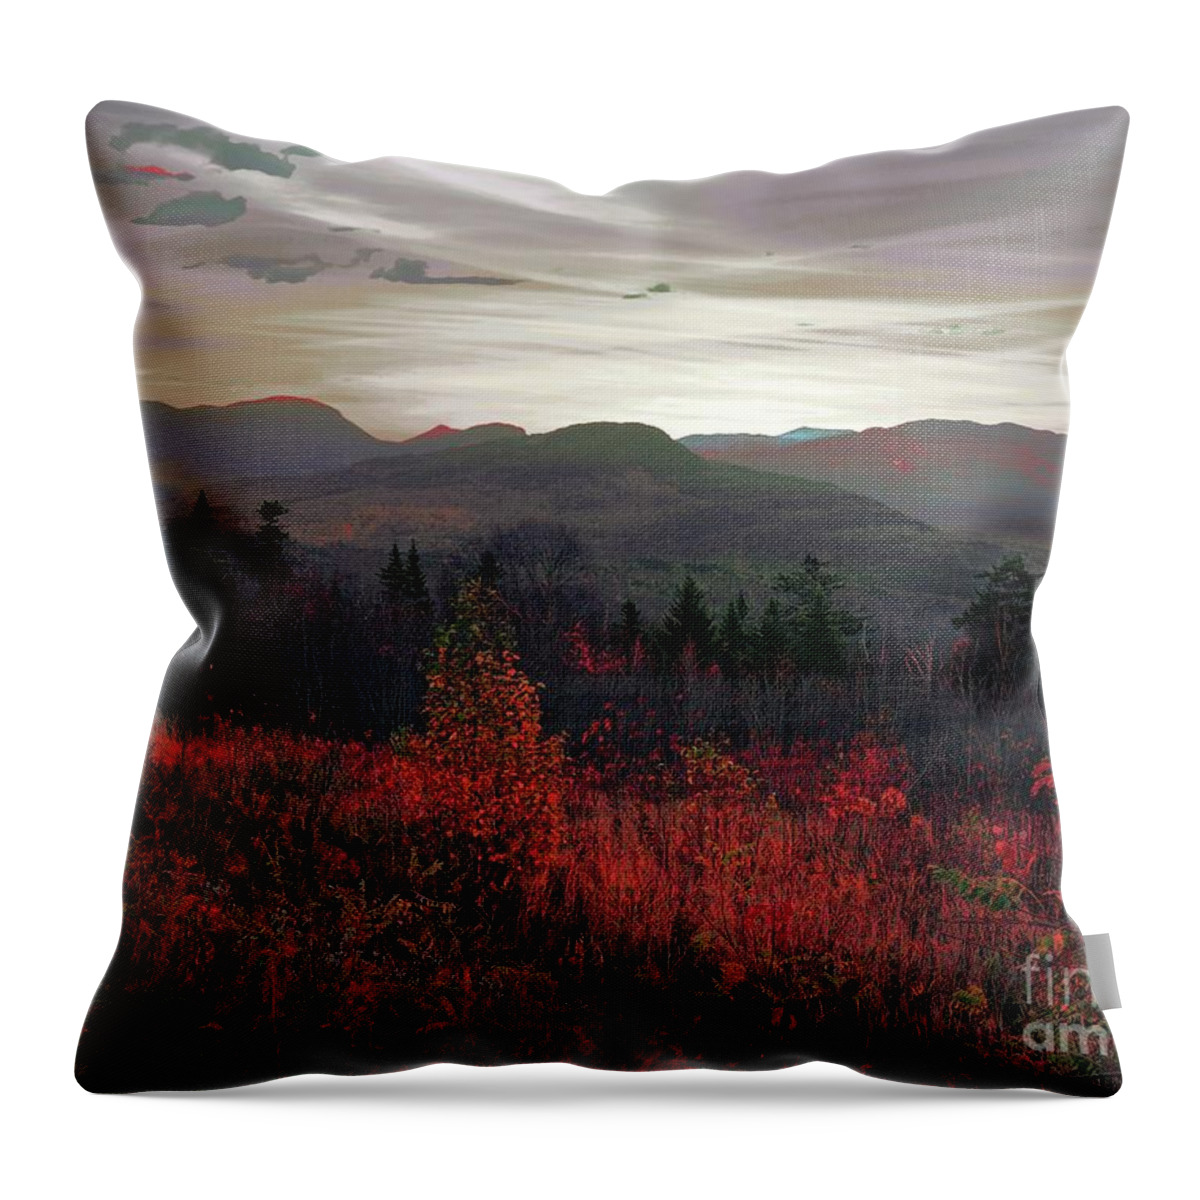  Throw Pillow featuring the photograph White Mountains #4 by Marcia Lee Jones